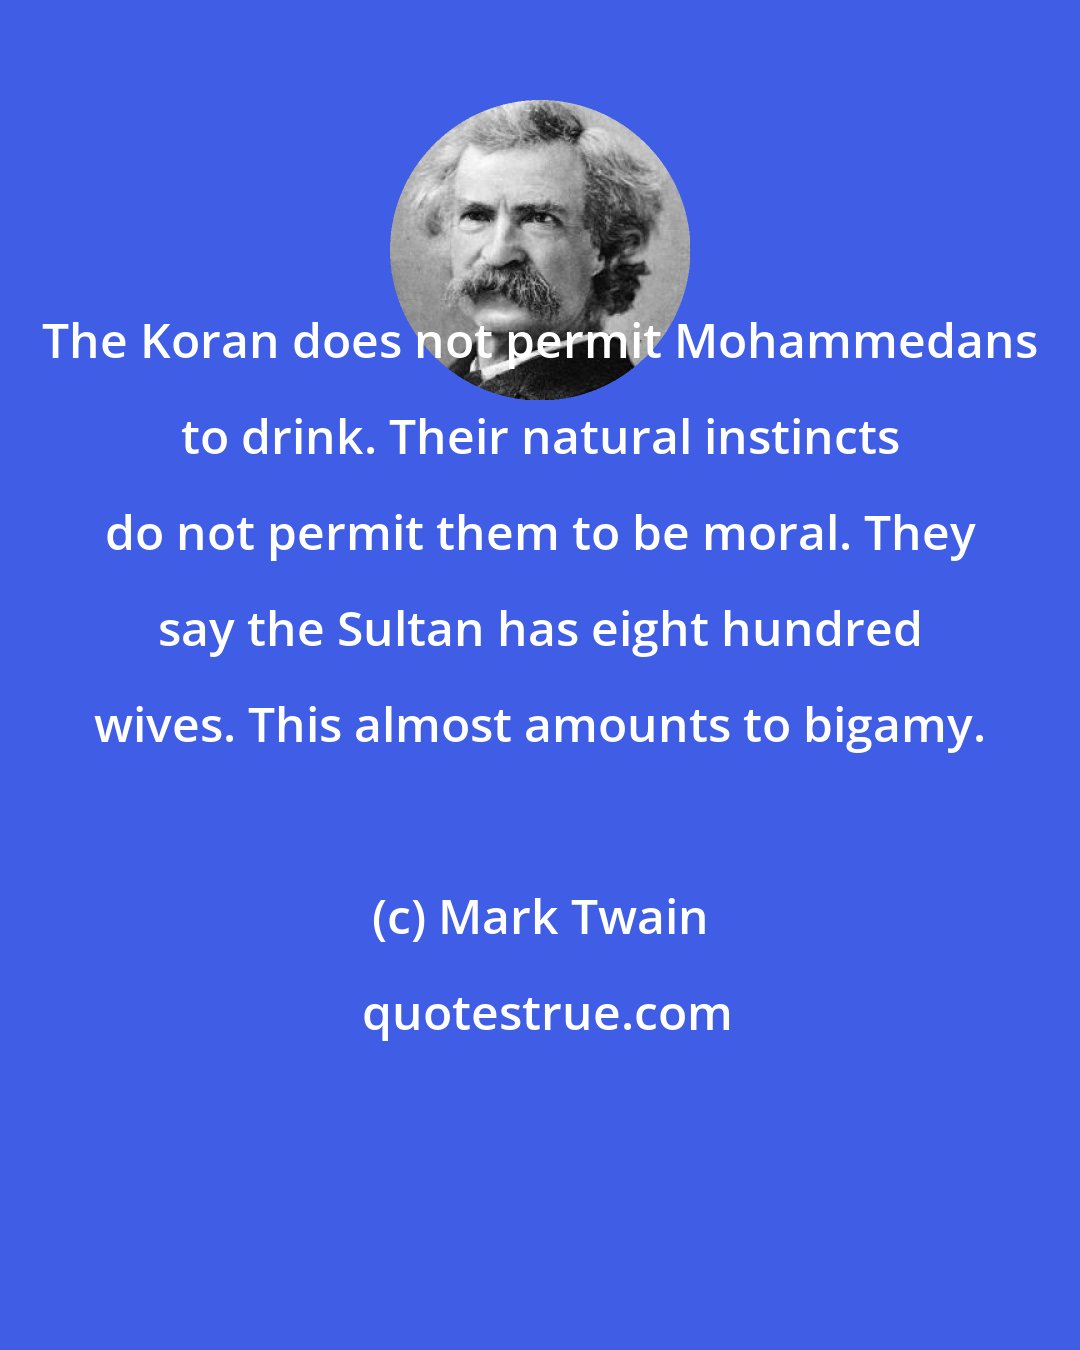 Mark Twain: The Koran does not permit Mohammedans to drink. Their natural instincts do not permit them to be moral. They say the Sultan has eight hundred wives. This almost amounts to bigamy.